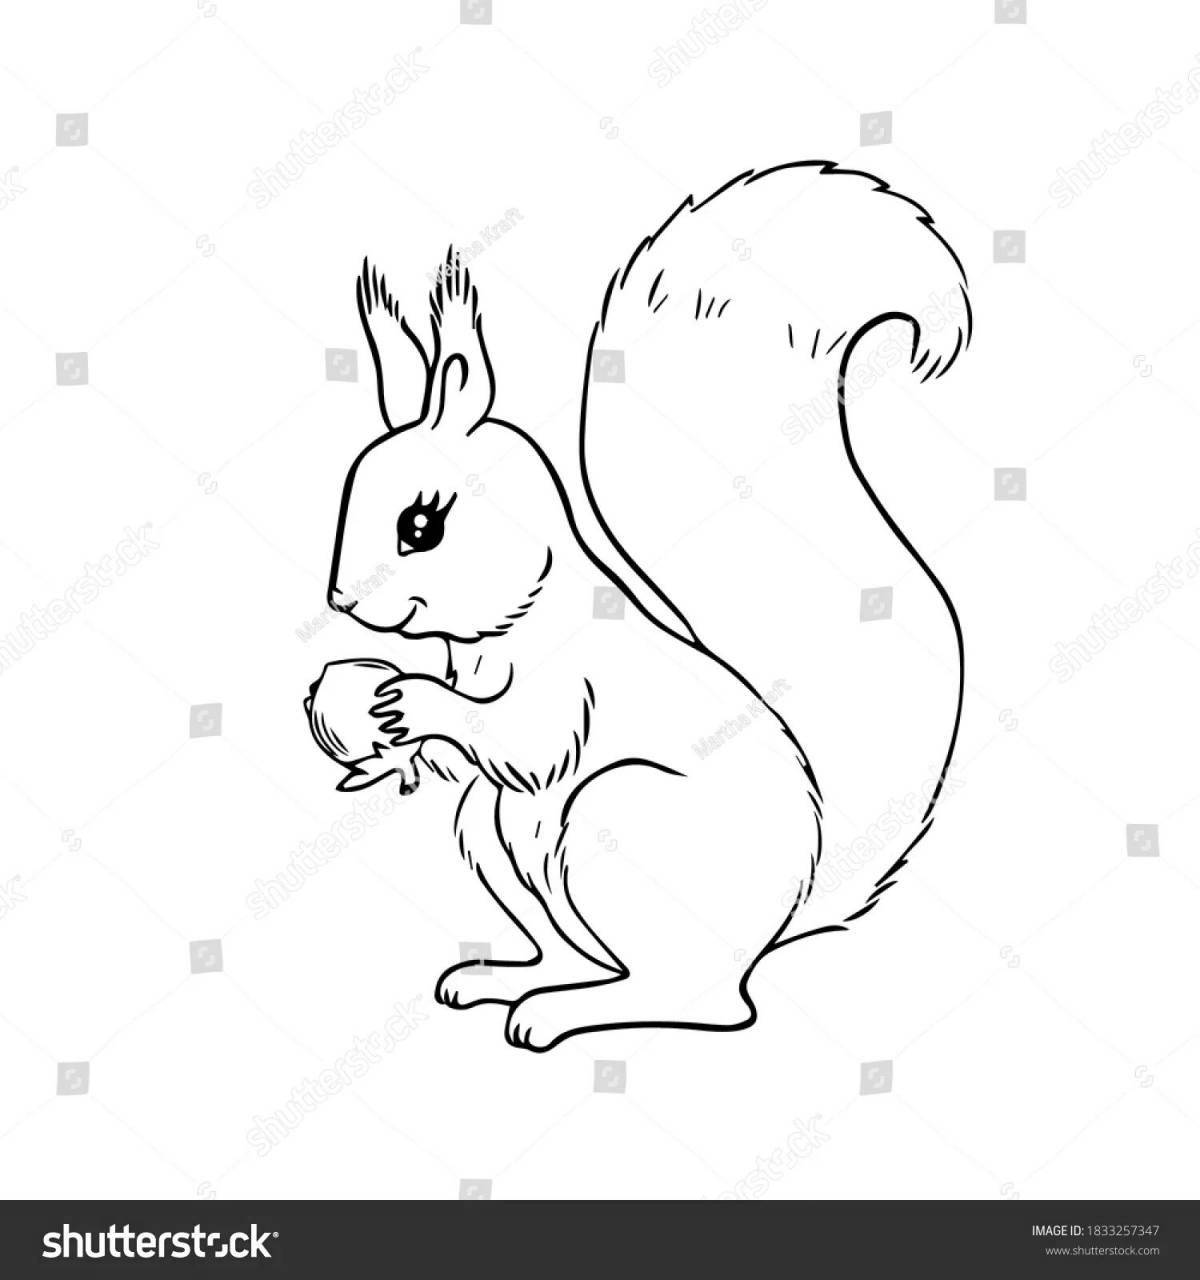 Cute squirrel coloring with bump